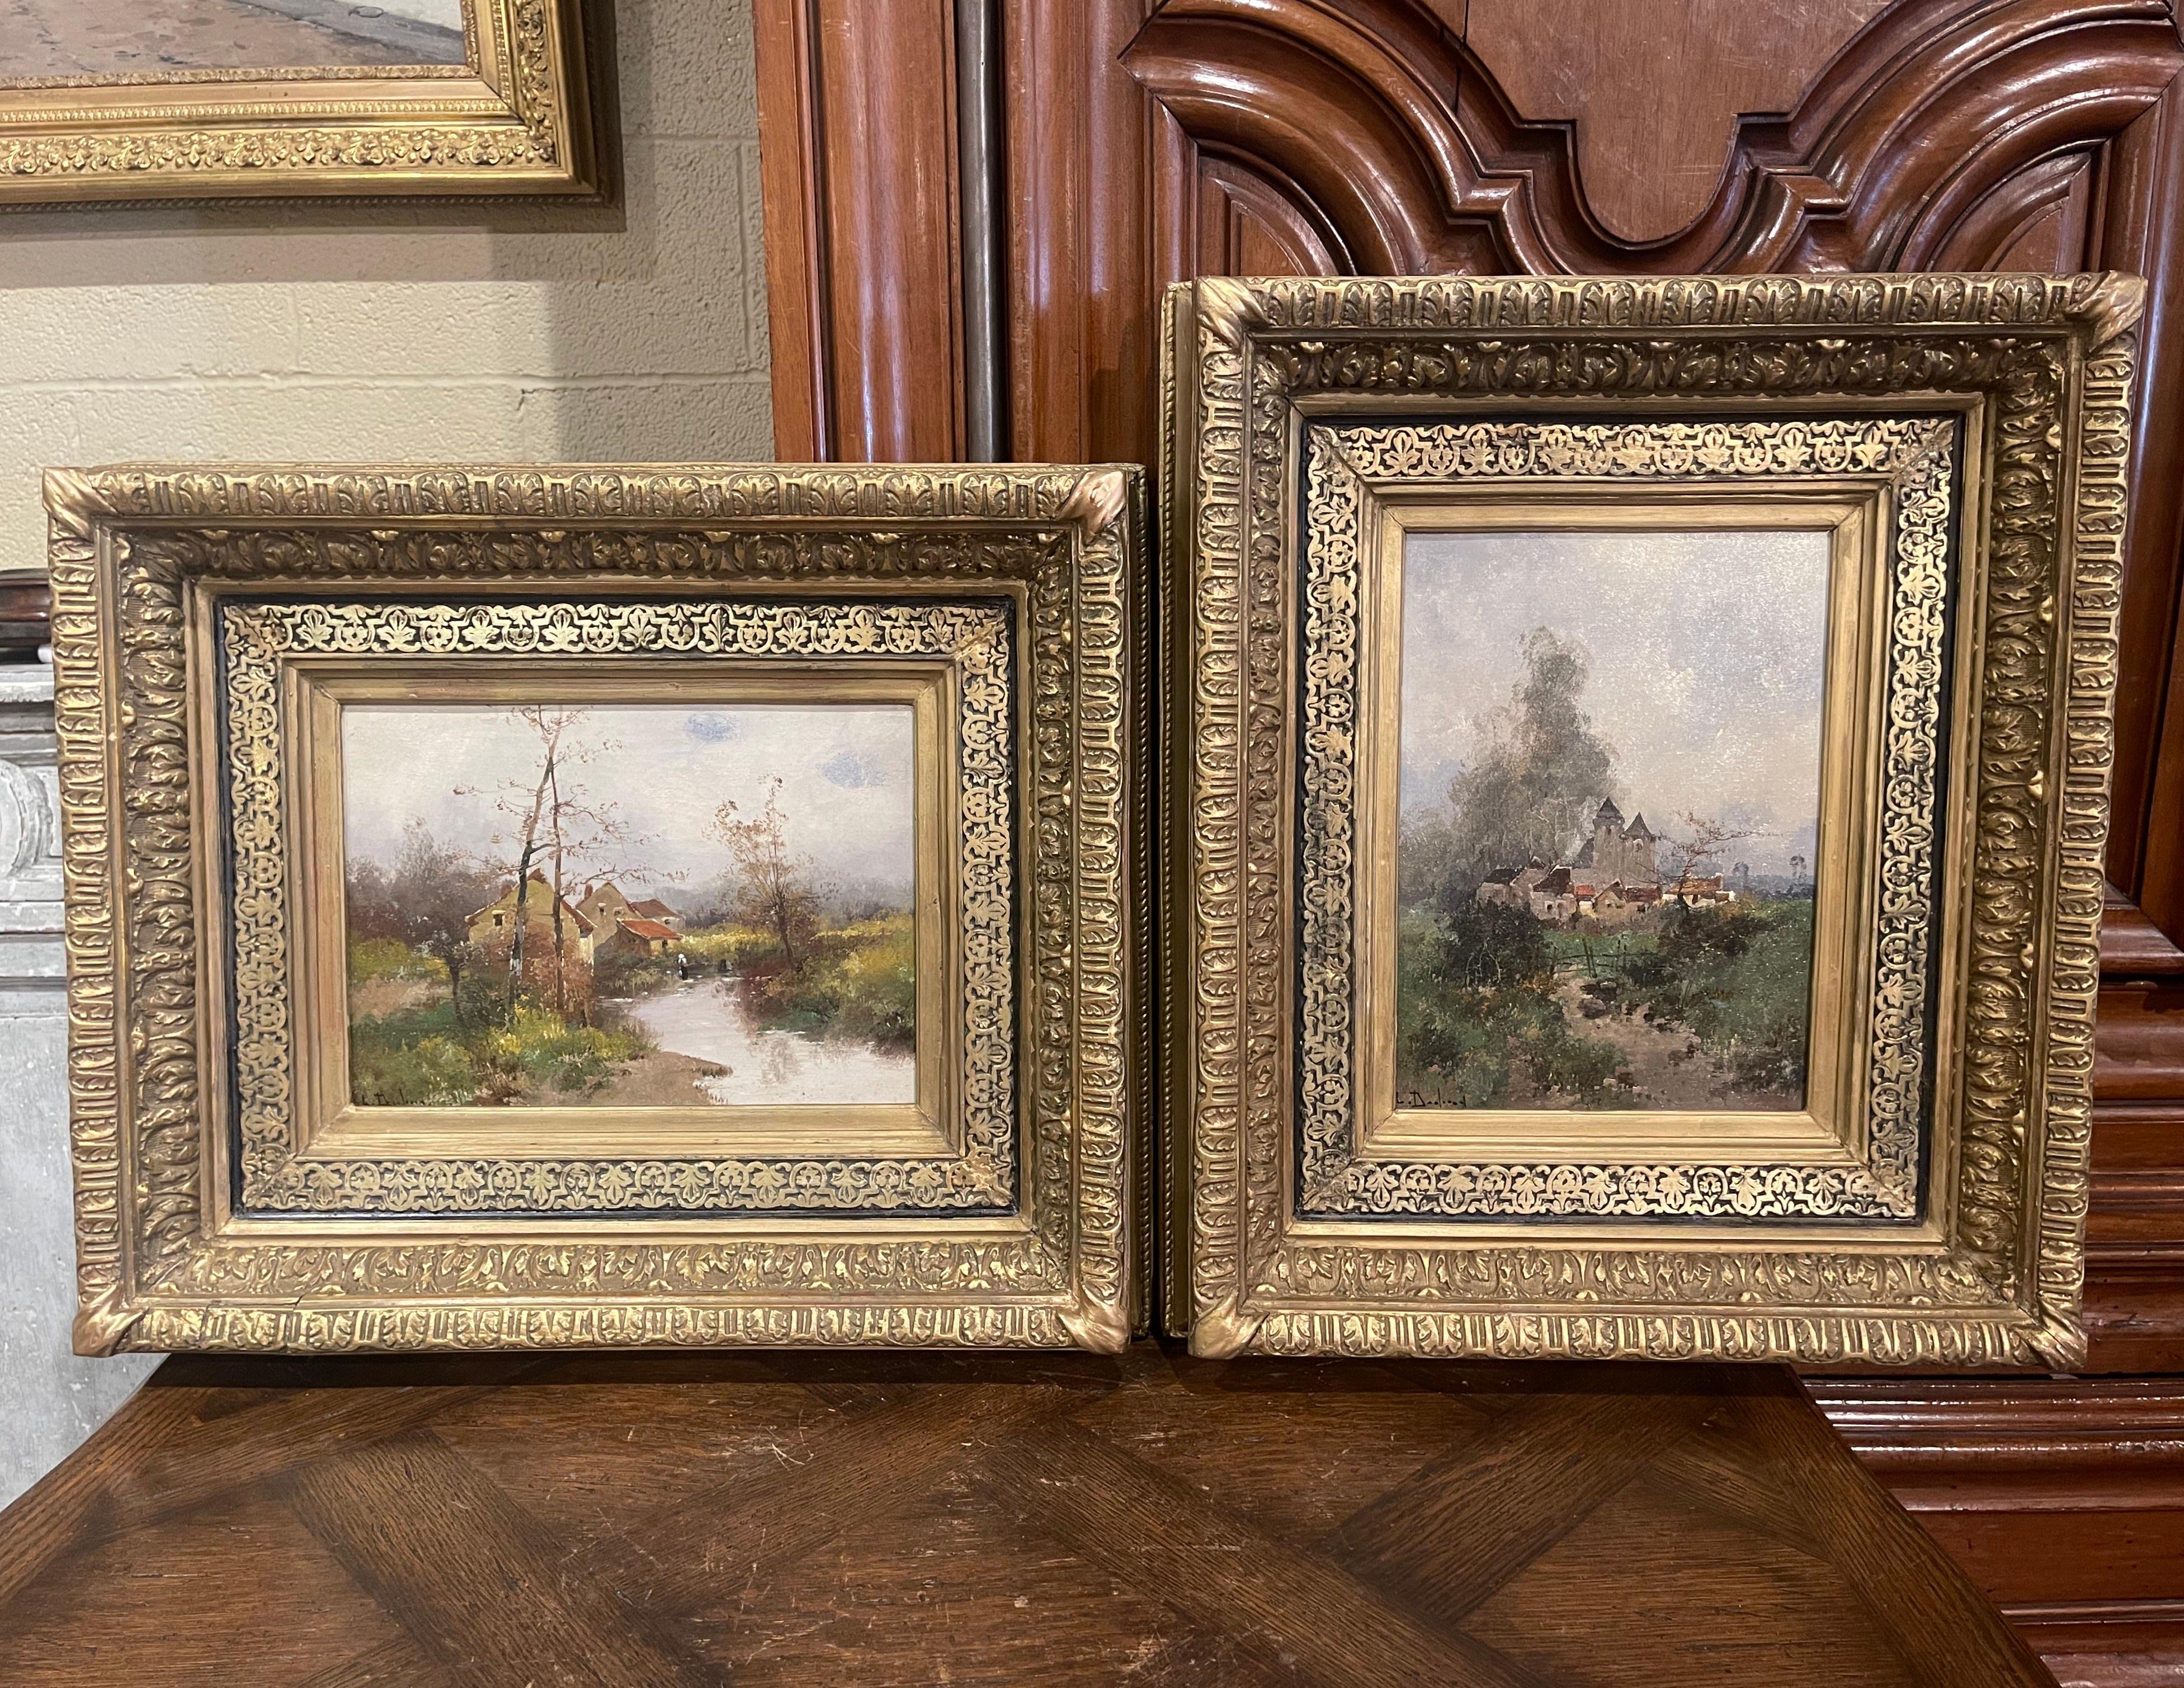  19th Century Landscapes Paintings Signed Dupuy for E. Galien-Laloue, Set of Two In Excellent Condition For Sale In Dallas, TX